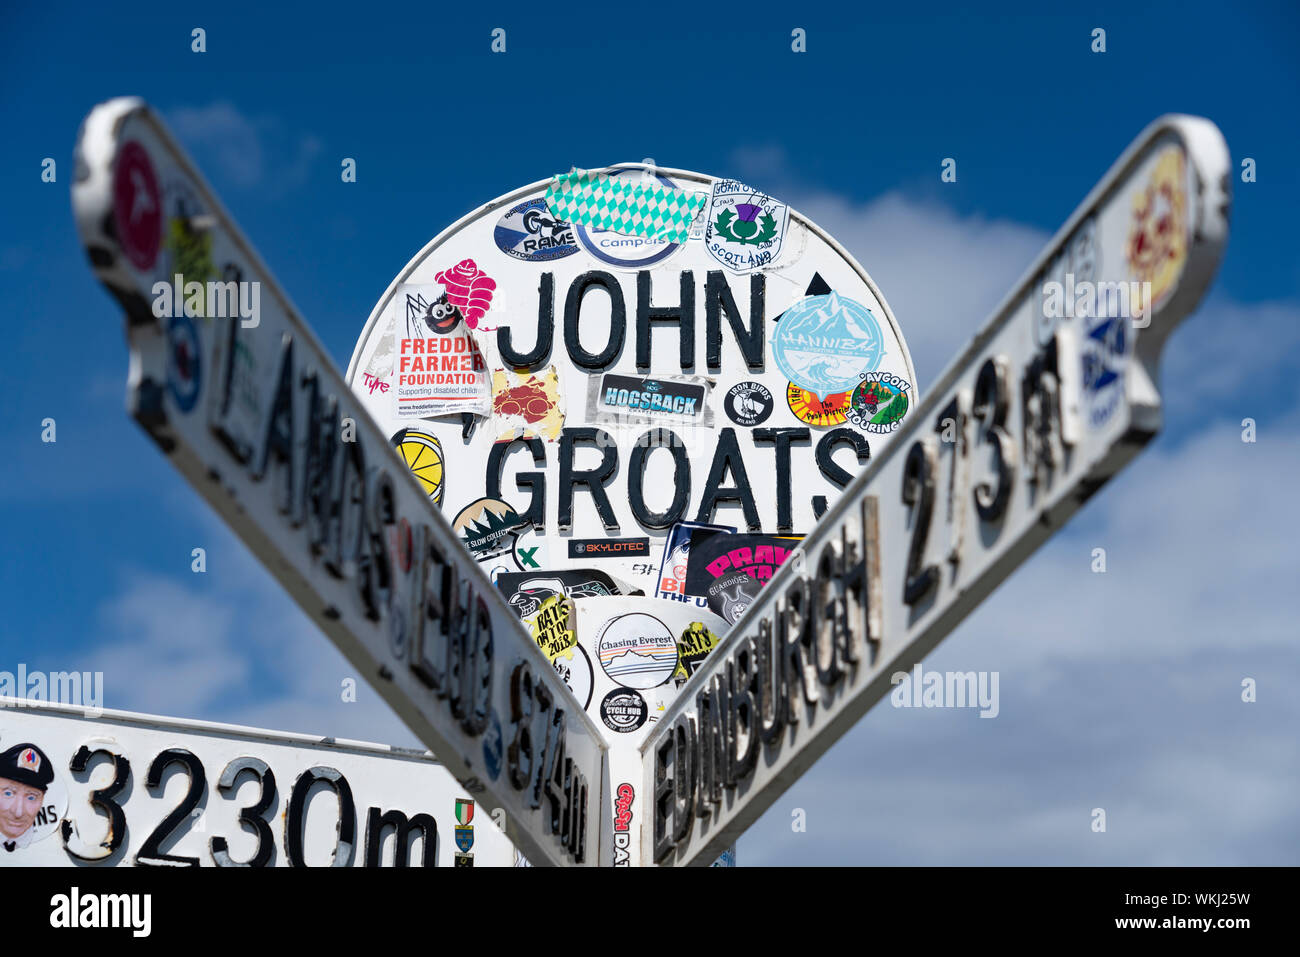 Distance marker direction signs at John O' groats on the North Coast 500 tourist motoring route in northern Scotland, UK Stock Photo